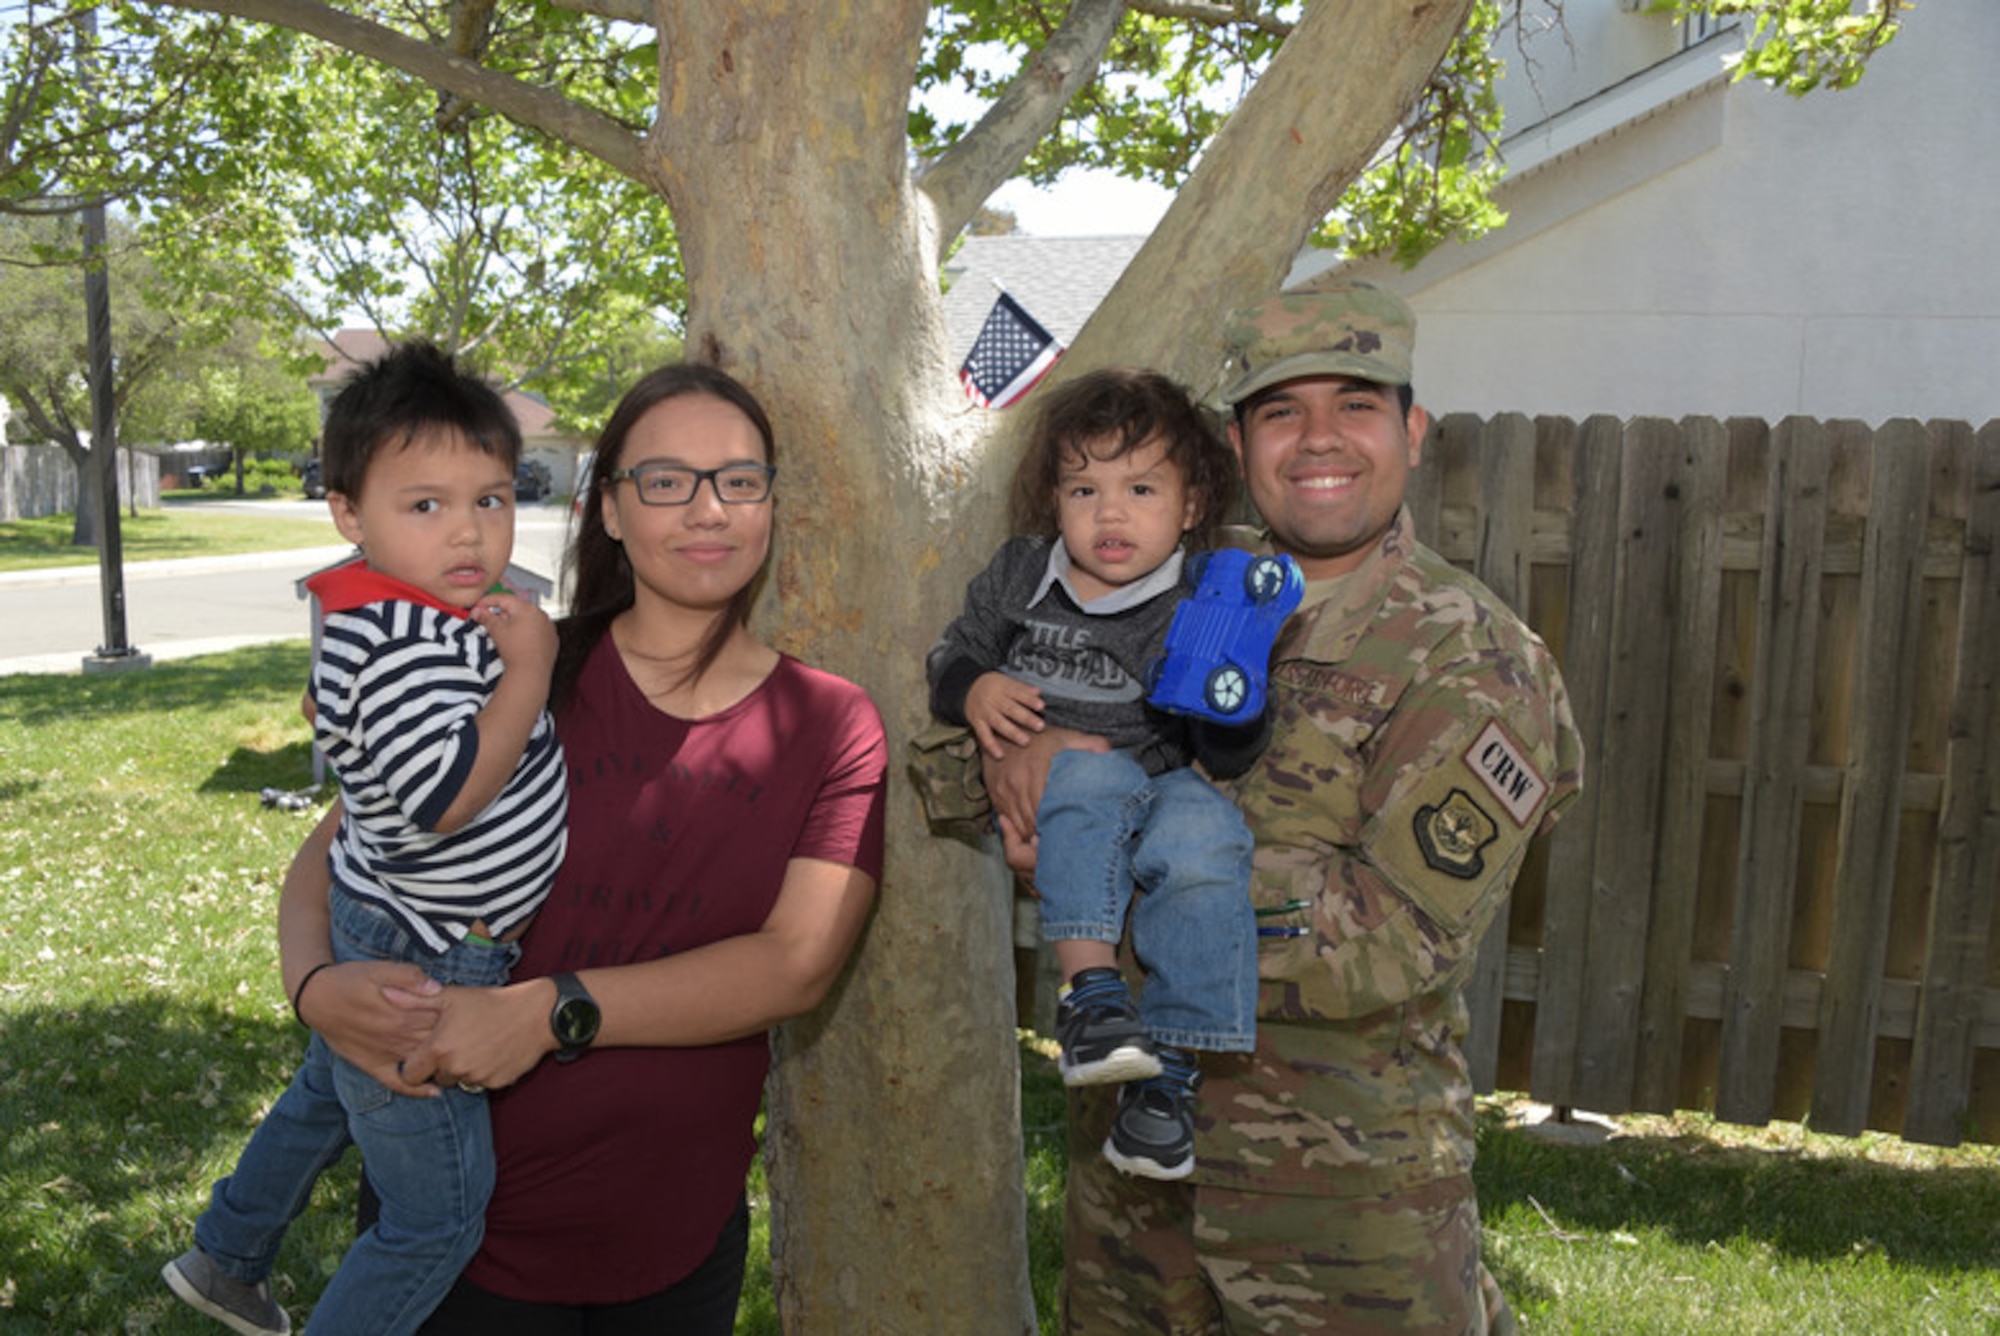 Savannah Ruiz (Left) and her husband, Senior Airman Ruben Ruiz (Right), 921st Contingency Response Squadron aerial porter, pose for a photo with their children outside their home at Travis Air Force Base, Calif., April 26, 2018.(U.S. Air Force photo by Tech. Sgt. James Hodgman)